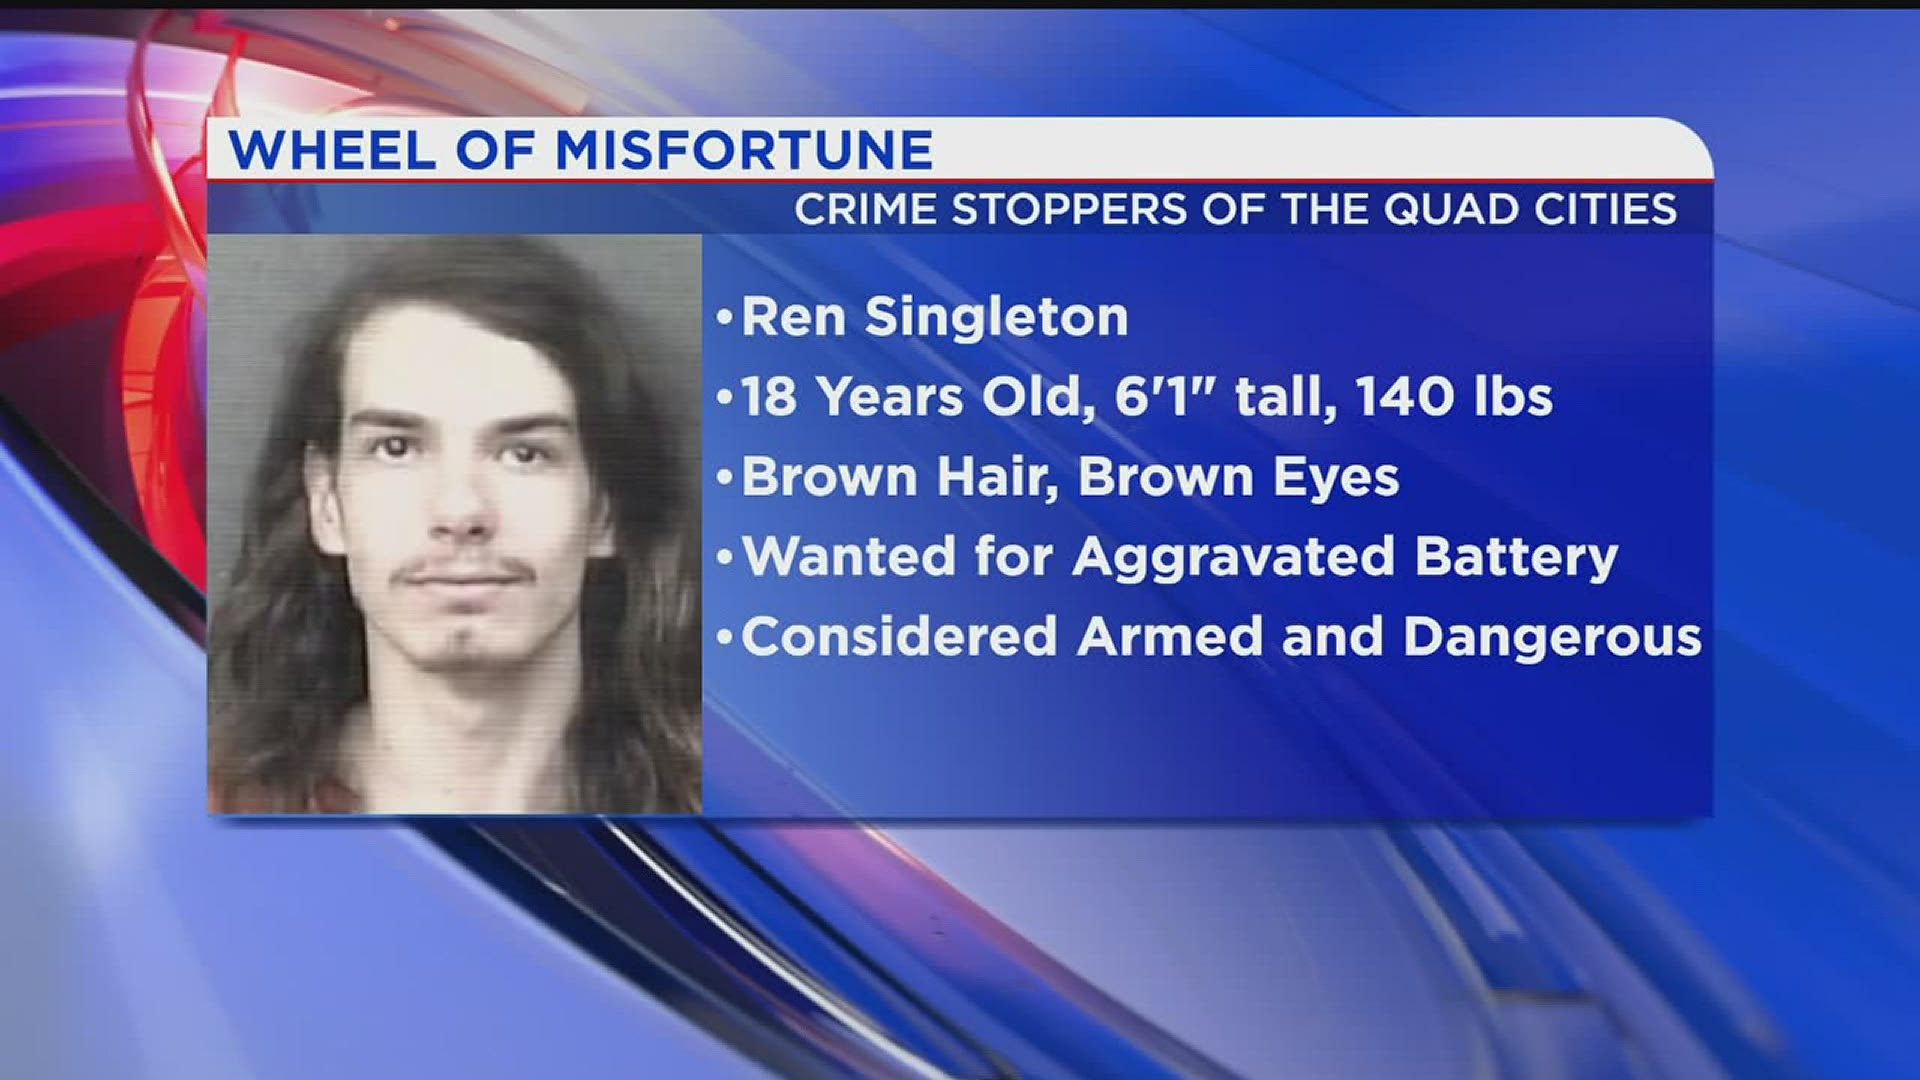 CrimeStoppers of the Quad Cities will pay you up to $500 for tips leading to Singleton's arrest.